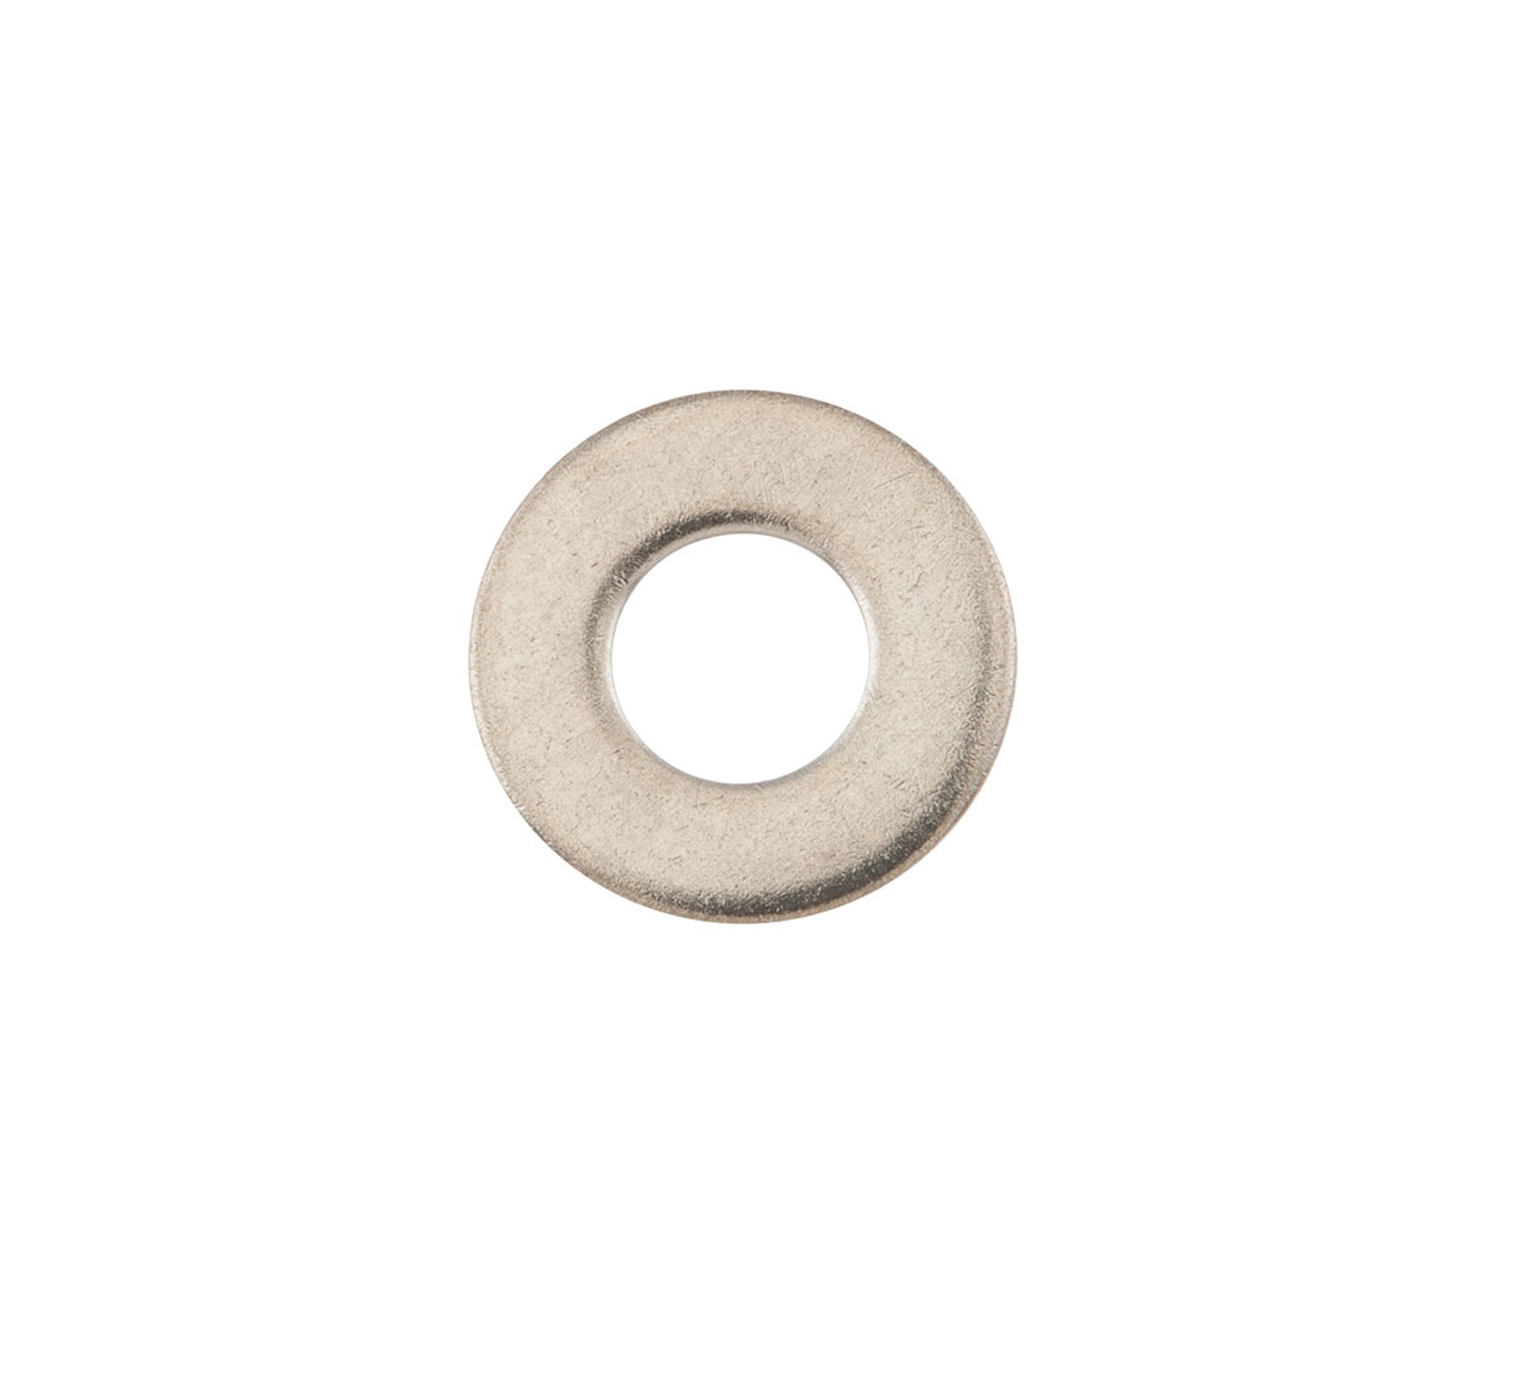 140027 Stainless Steel Flat Washer - 0.75 x 0.35 x 0.04 in alt 1